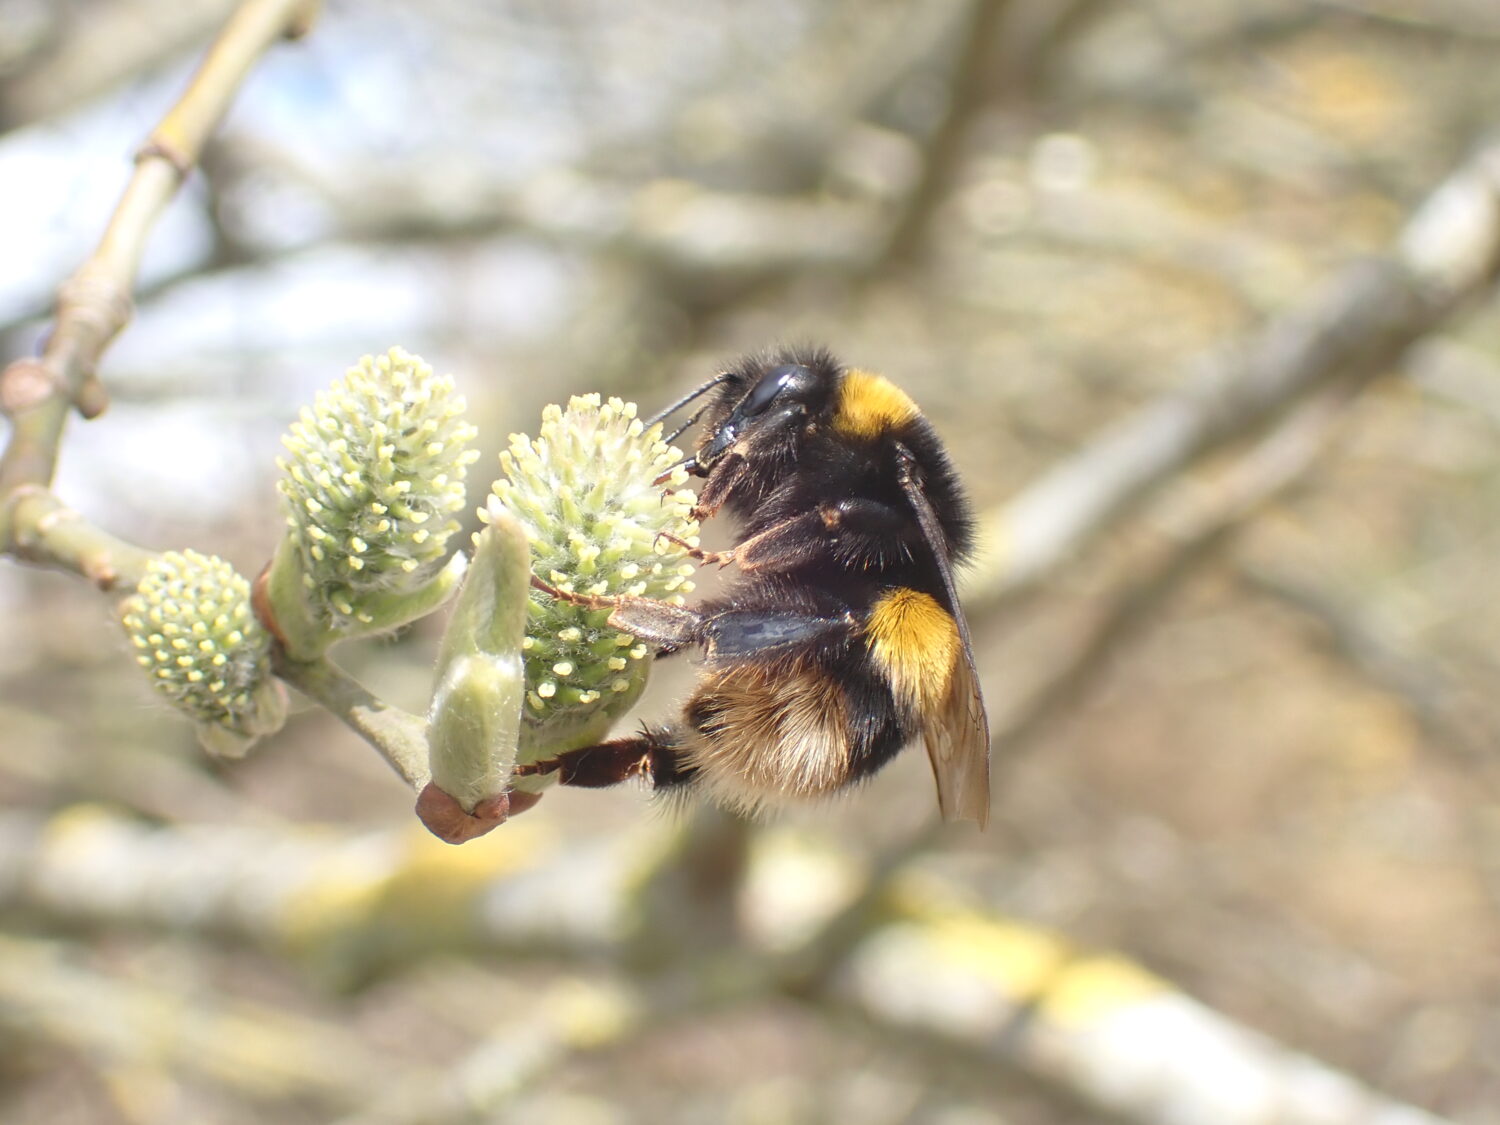 Queen Buff-tailed Bumblebee